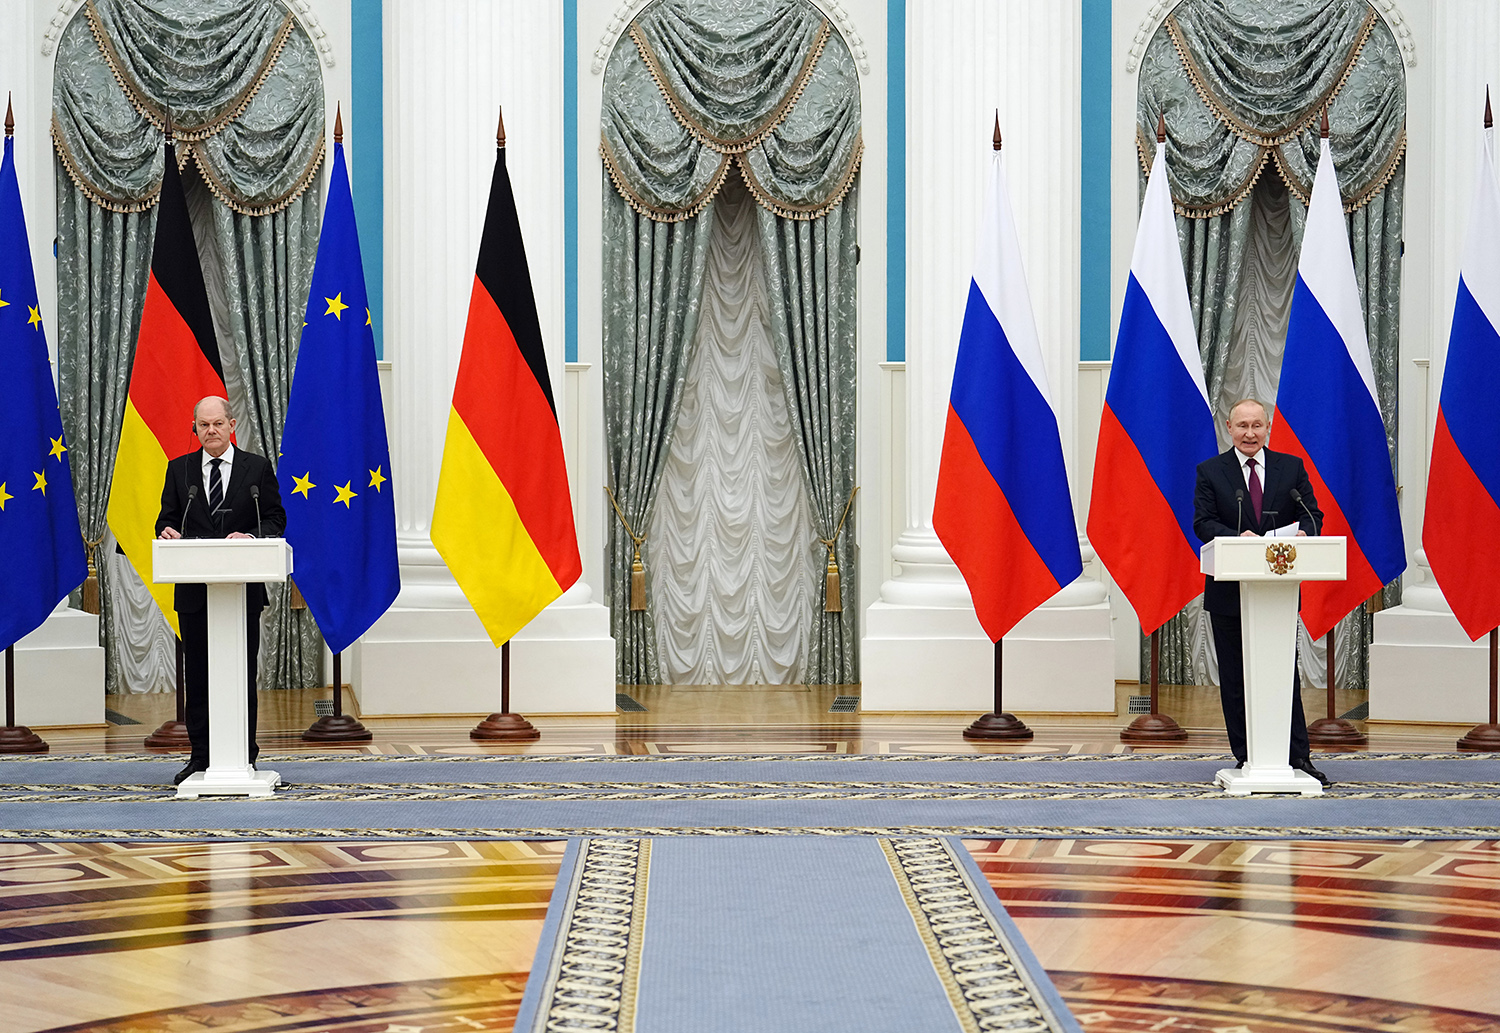 German Chancellor Olaf Scholz (L) and Russian President Vladimir Putin give a joint press conference after a one-on-one meeting in Moscow, Russia, on February 15.